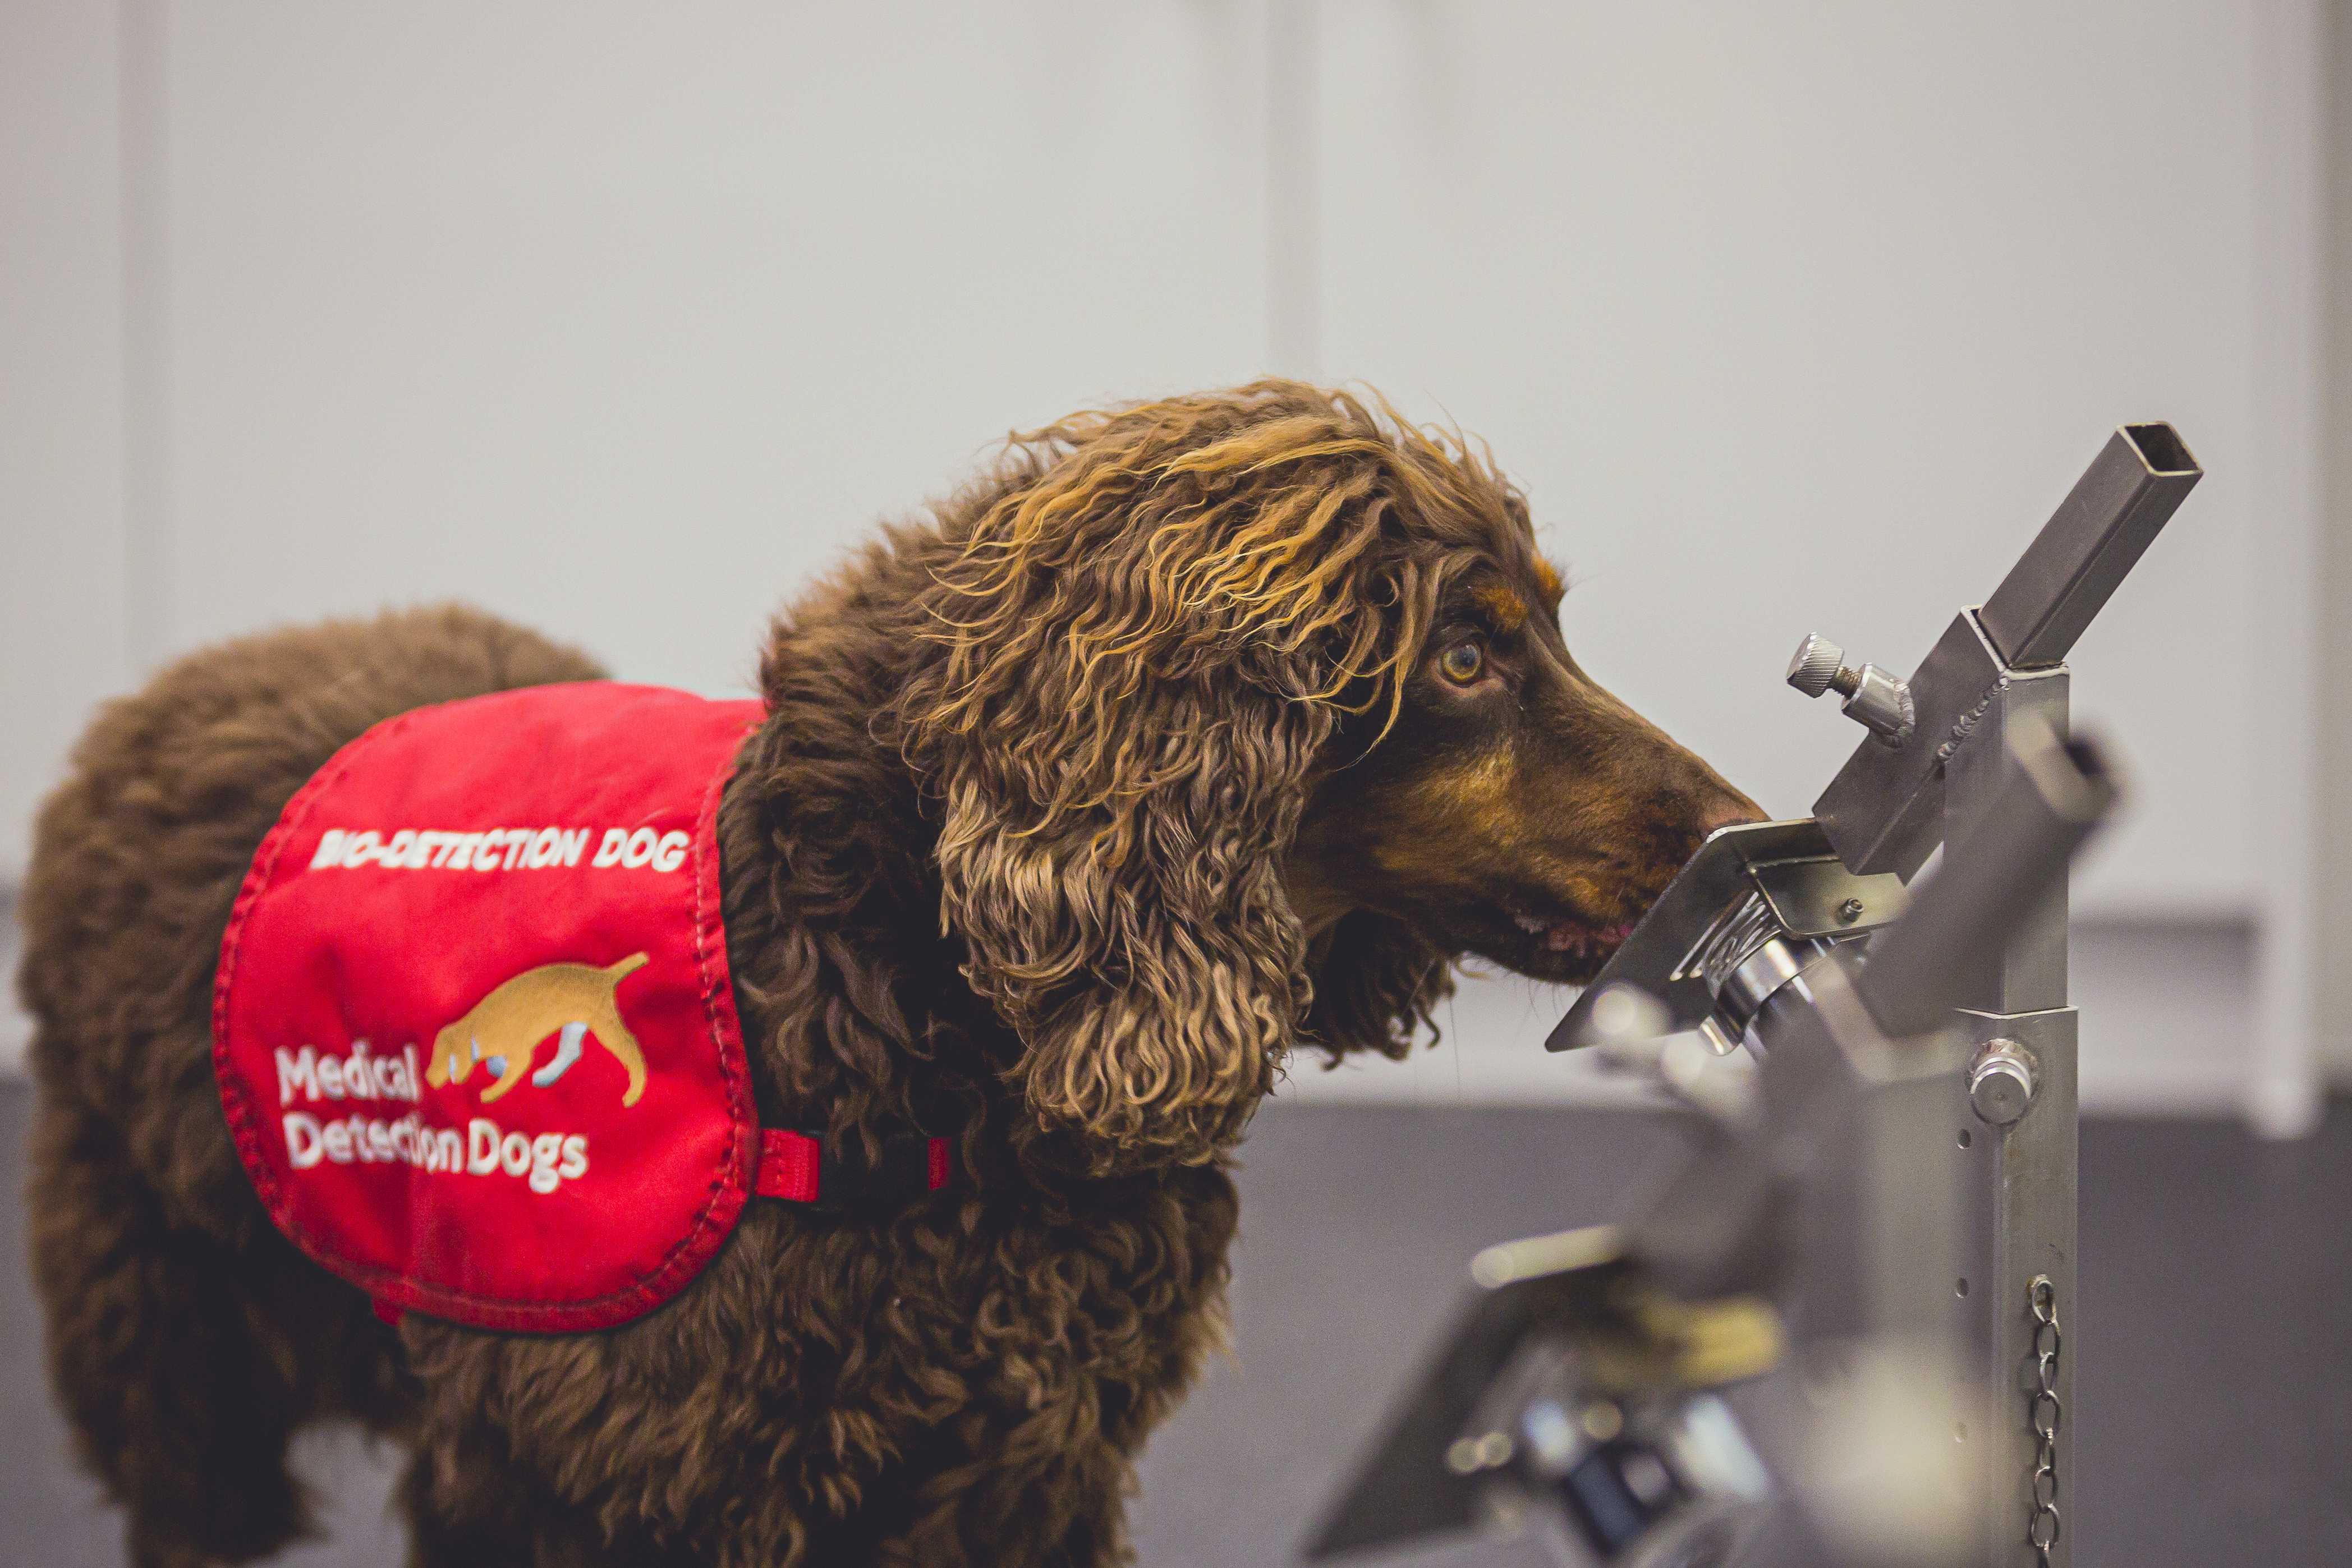 Asher, one of the bio detection dogs in the COVID-19 detection dog trial. Credit: Neil Pollock/MDD